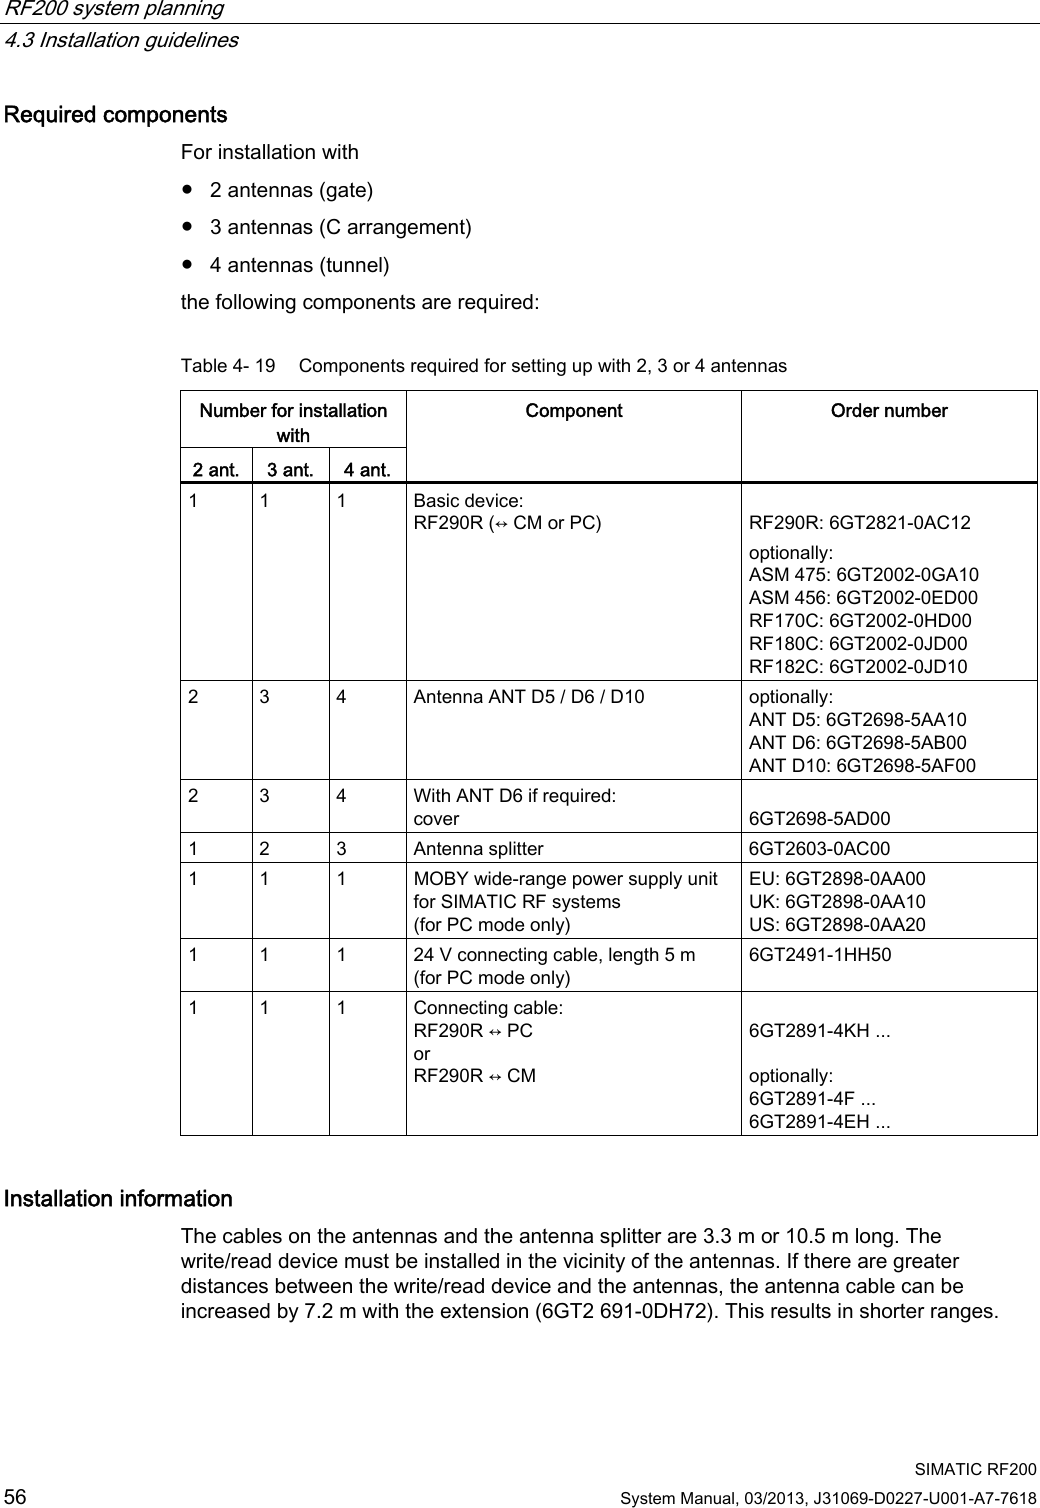 RF200 system planning   4.3 Installation guidelines  SIMATIC RF200 56 System Manual, 03/2013, J31069-D0227-U001-A7-7618 Required components For installation with ● 2 antennas (gate) ● 3 antennas (C arrangement) ● 4 antennas (tunnel) the following components are required: Table 4- 19  Components required for setting up with 2, 3 or 4 antennas Number for installation with 2 ant.  3 ant.  4 ant. Component  Order number 1  1  1  Basic device: RF290R (↔ CM or PC)  RF290R: 6GT2821-0AC12 optionally: ASM 475: 6GT2002-0GA10 ASM 456: 6GT2002-0ED00 RF170C: 6GT2002-0HD00 RF180C: 6GT2002-0JD00 RF182C: 6GT2002-0JD10 2  3  4  Antenna ANT D5 / D6 / D10  optionally: ANT D5: 6GT2698-5AA10 ANT D6: 6GT2698-5AB00 ANT D10: 6GT2698-5AF00 2  3  4  With ANT D6 if required: cover  6GT2698-5AD00 1  2  3  Antenna splitter  6GT2603-0AC00 1  1  1  MOBY wide-range power supply unit for SIMATIC RF systems (for PC mode only) EU: 6GT2898-0AA00 UK: 6GT2898-0AA10 US: 6GT2898-0AA20 1  1  1  24 V connecting cable, length 5 m (for PC mode only) 6GT2491-1HH50 1  1  1  Connecting cable: RF290R ↔ PC or RF290R ↔ CM   6GT2891-4KH ...  optionally: 6GT2891-4F ... 6GT2891-4EH ... Installation information The cables on the antennas and the antenna splitter are 3.3 m or 10.5 m long. The write/read device must be installed in the vicinity of the antennas. If there are greater distances between the write/read device and the antennas, the antenna cable can be increased by 7.2 m with the extension (6GT2 691-0DH72). This results in shorter ranges. 